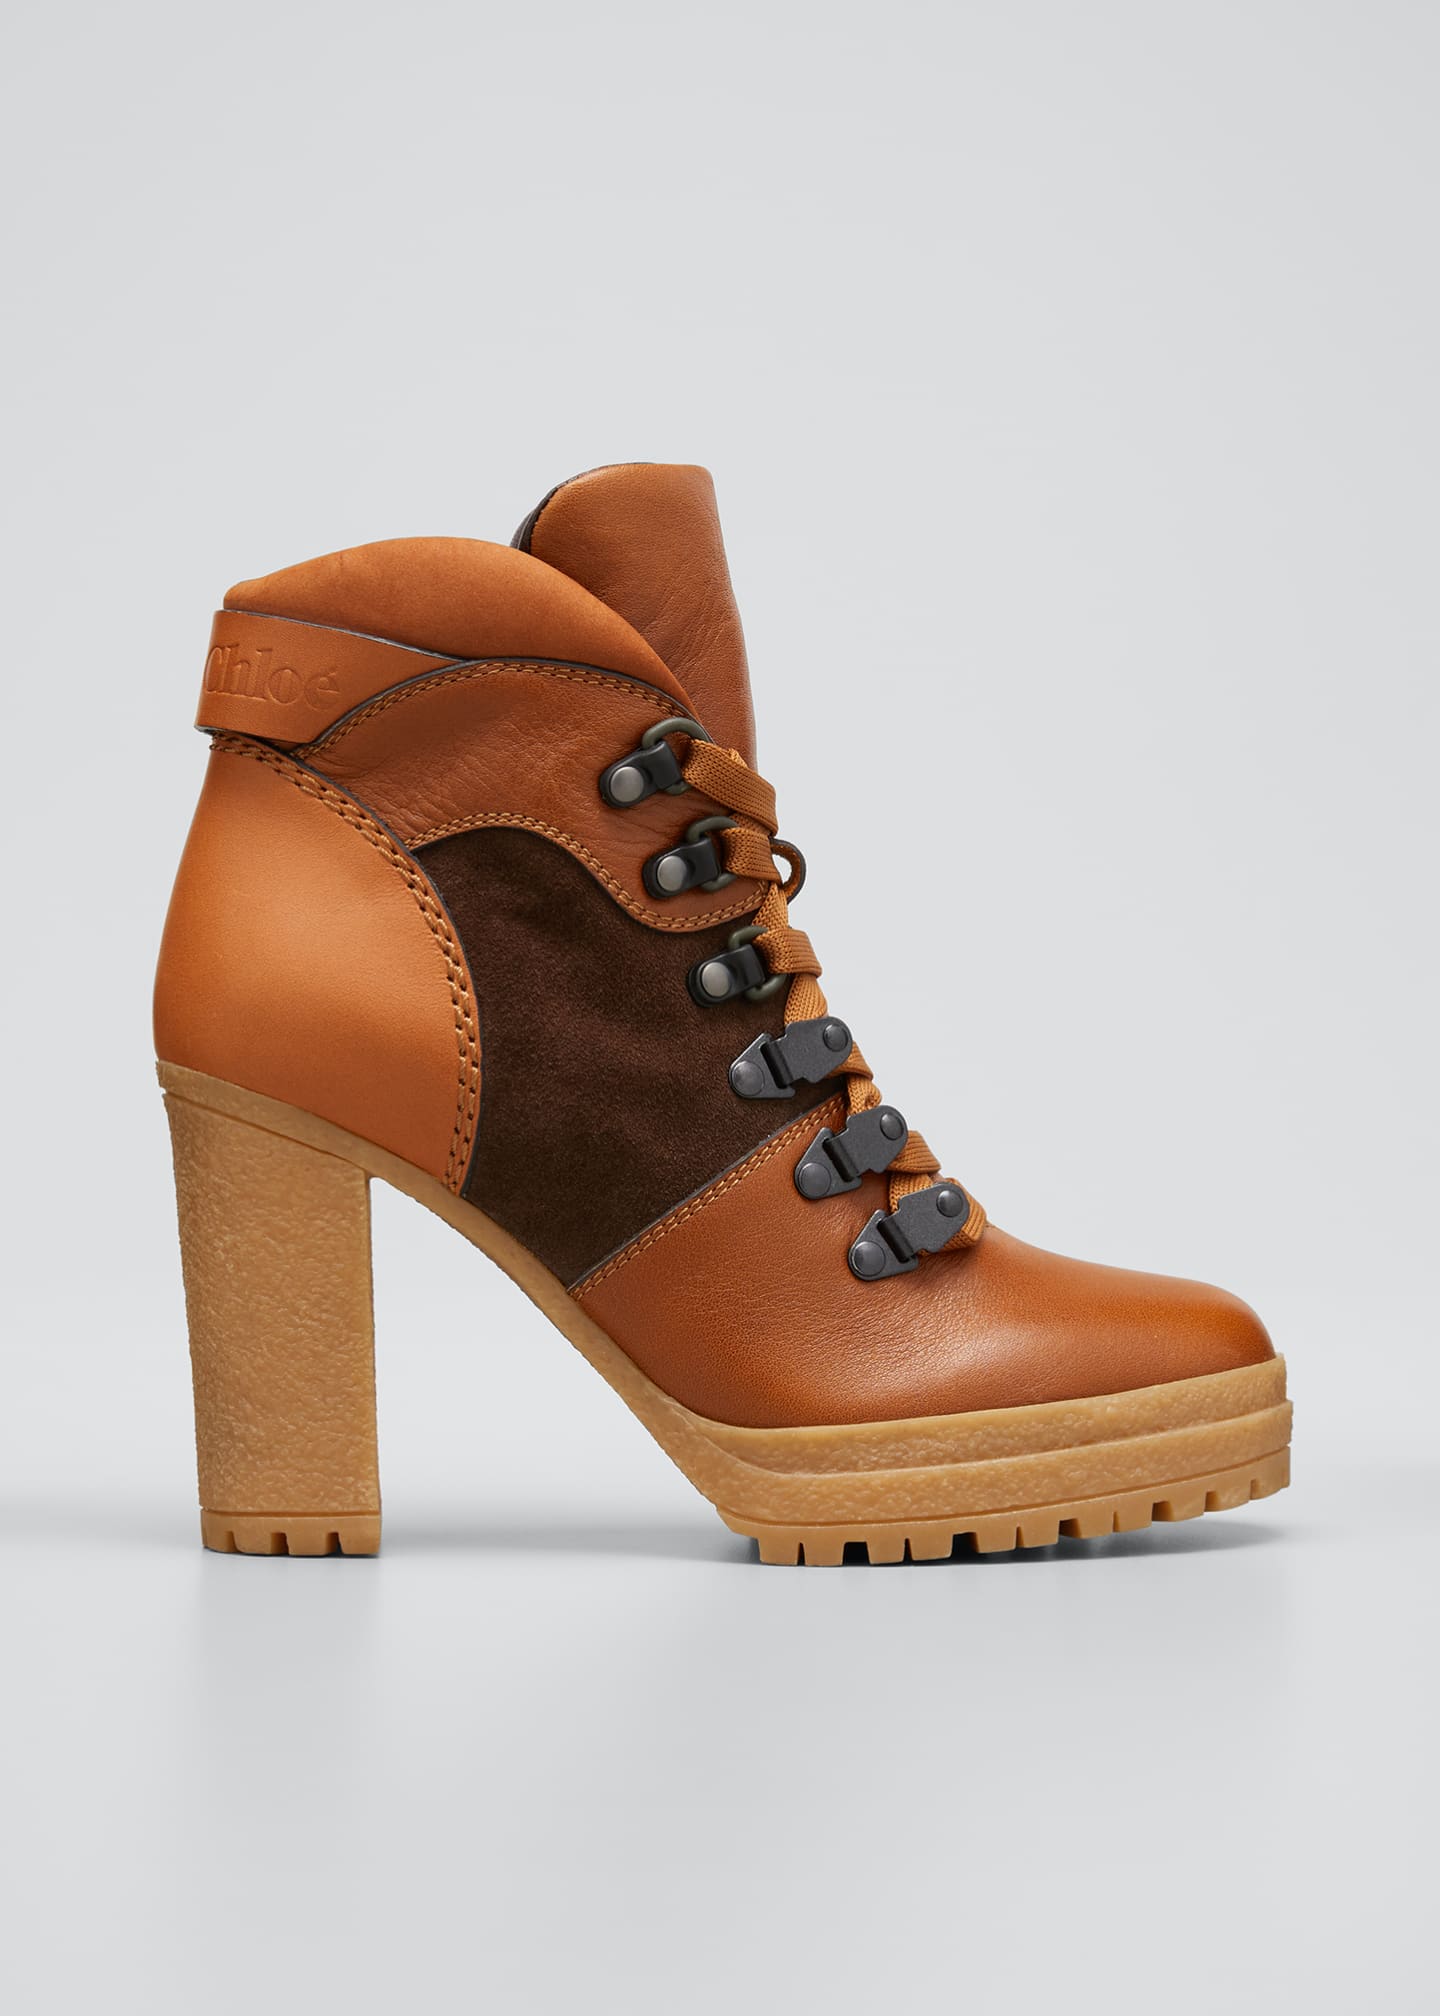 See by Chloe Aure Mixed Leather Hiking Booties - Bergdorf Goodman